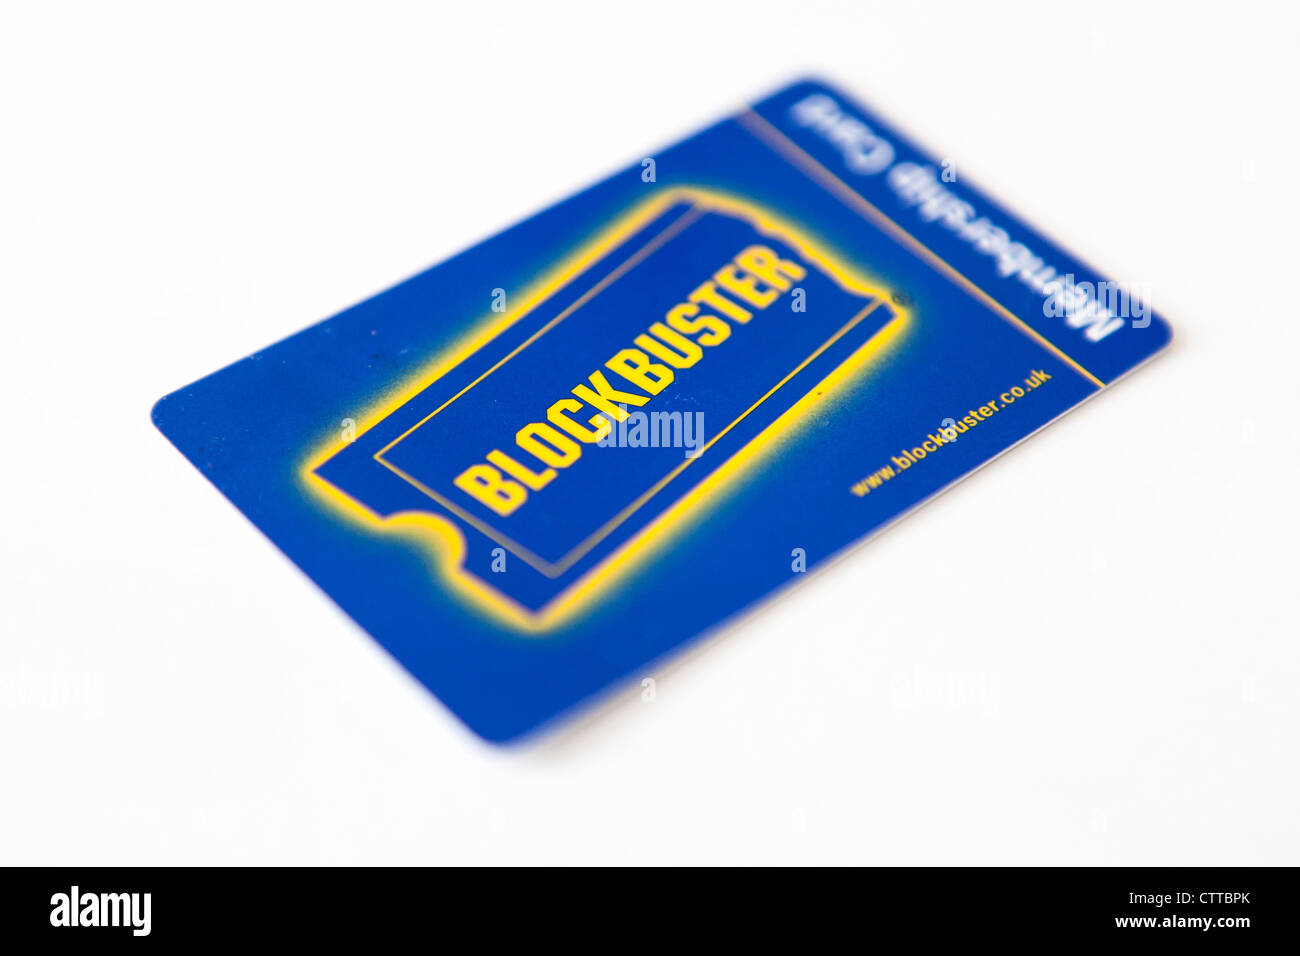 Blockbuster Video Card High Resolution Stock Photography And Images Alamy